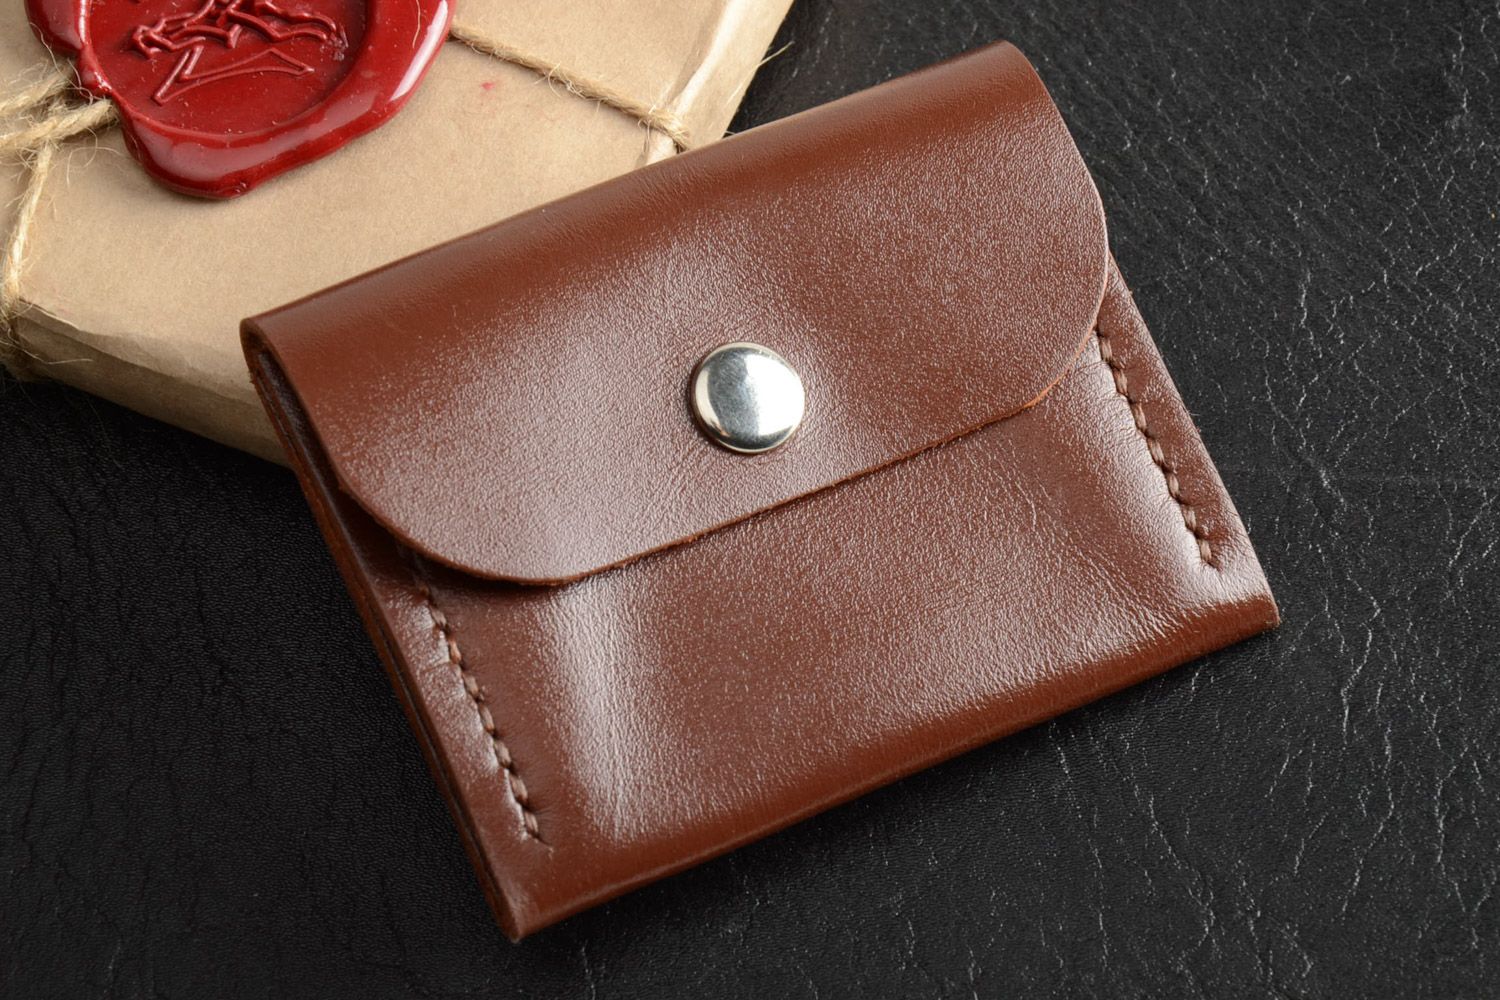 Handmade men's coin purse sewn of genuine leather of brown color with metal stud photo 1